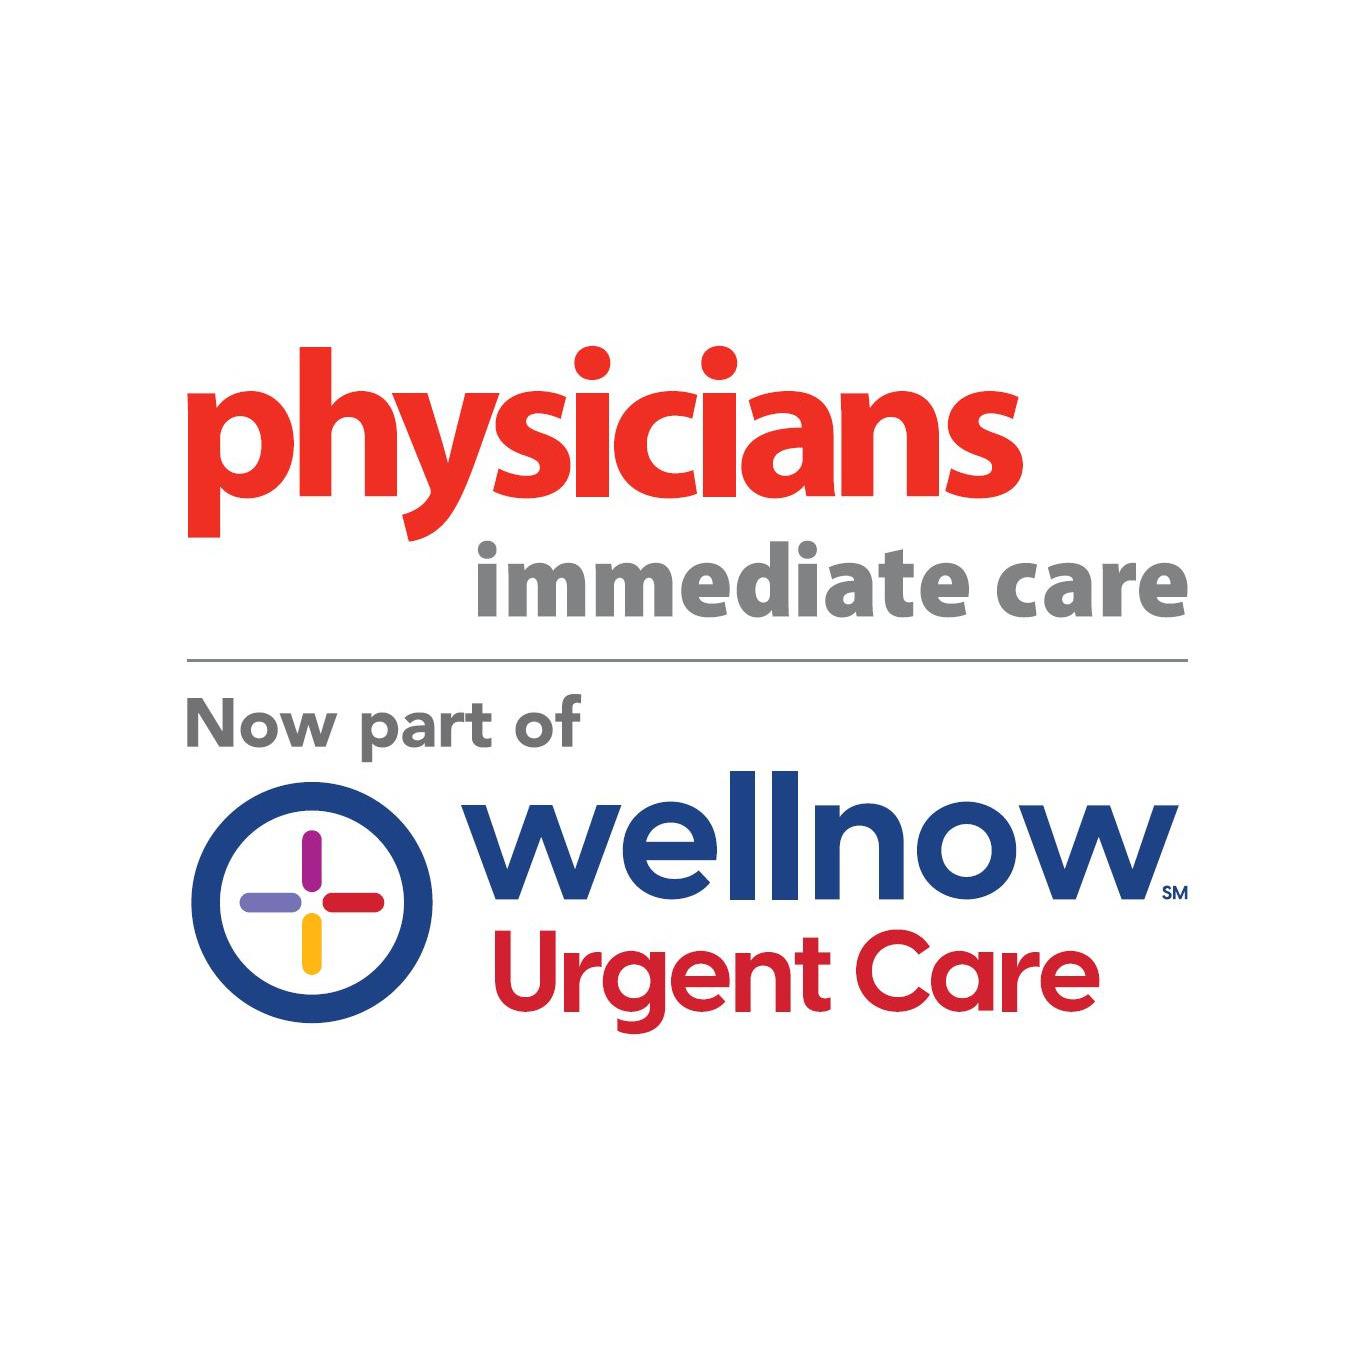 Physicians Urgent Care - Warsaw, IN 46582 - (574)306-4128 | ShowMeLocal.com